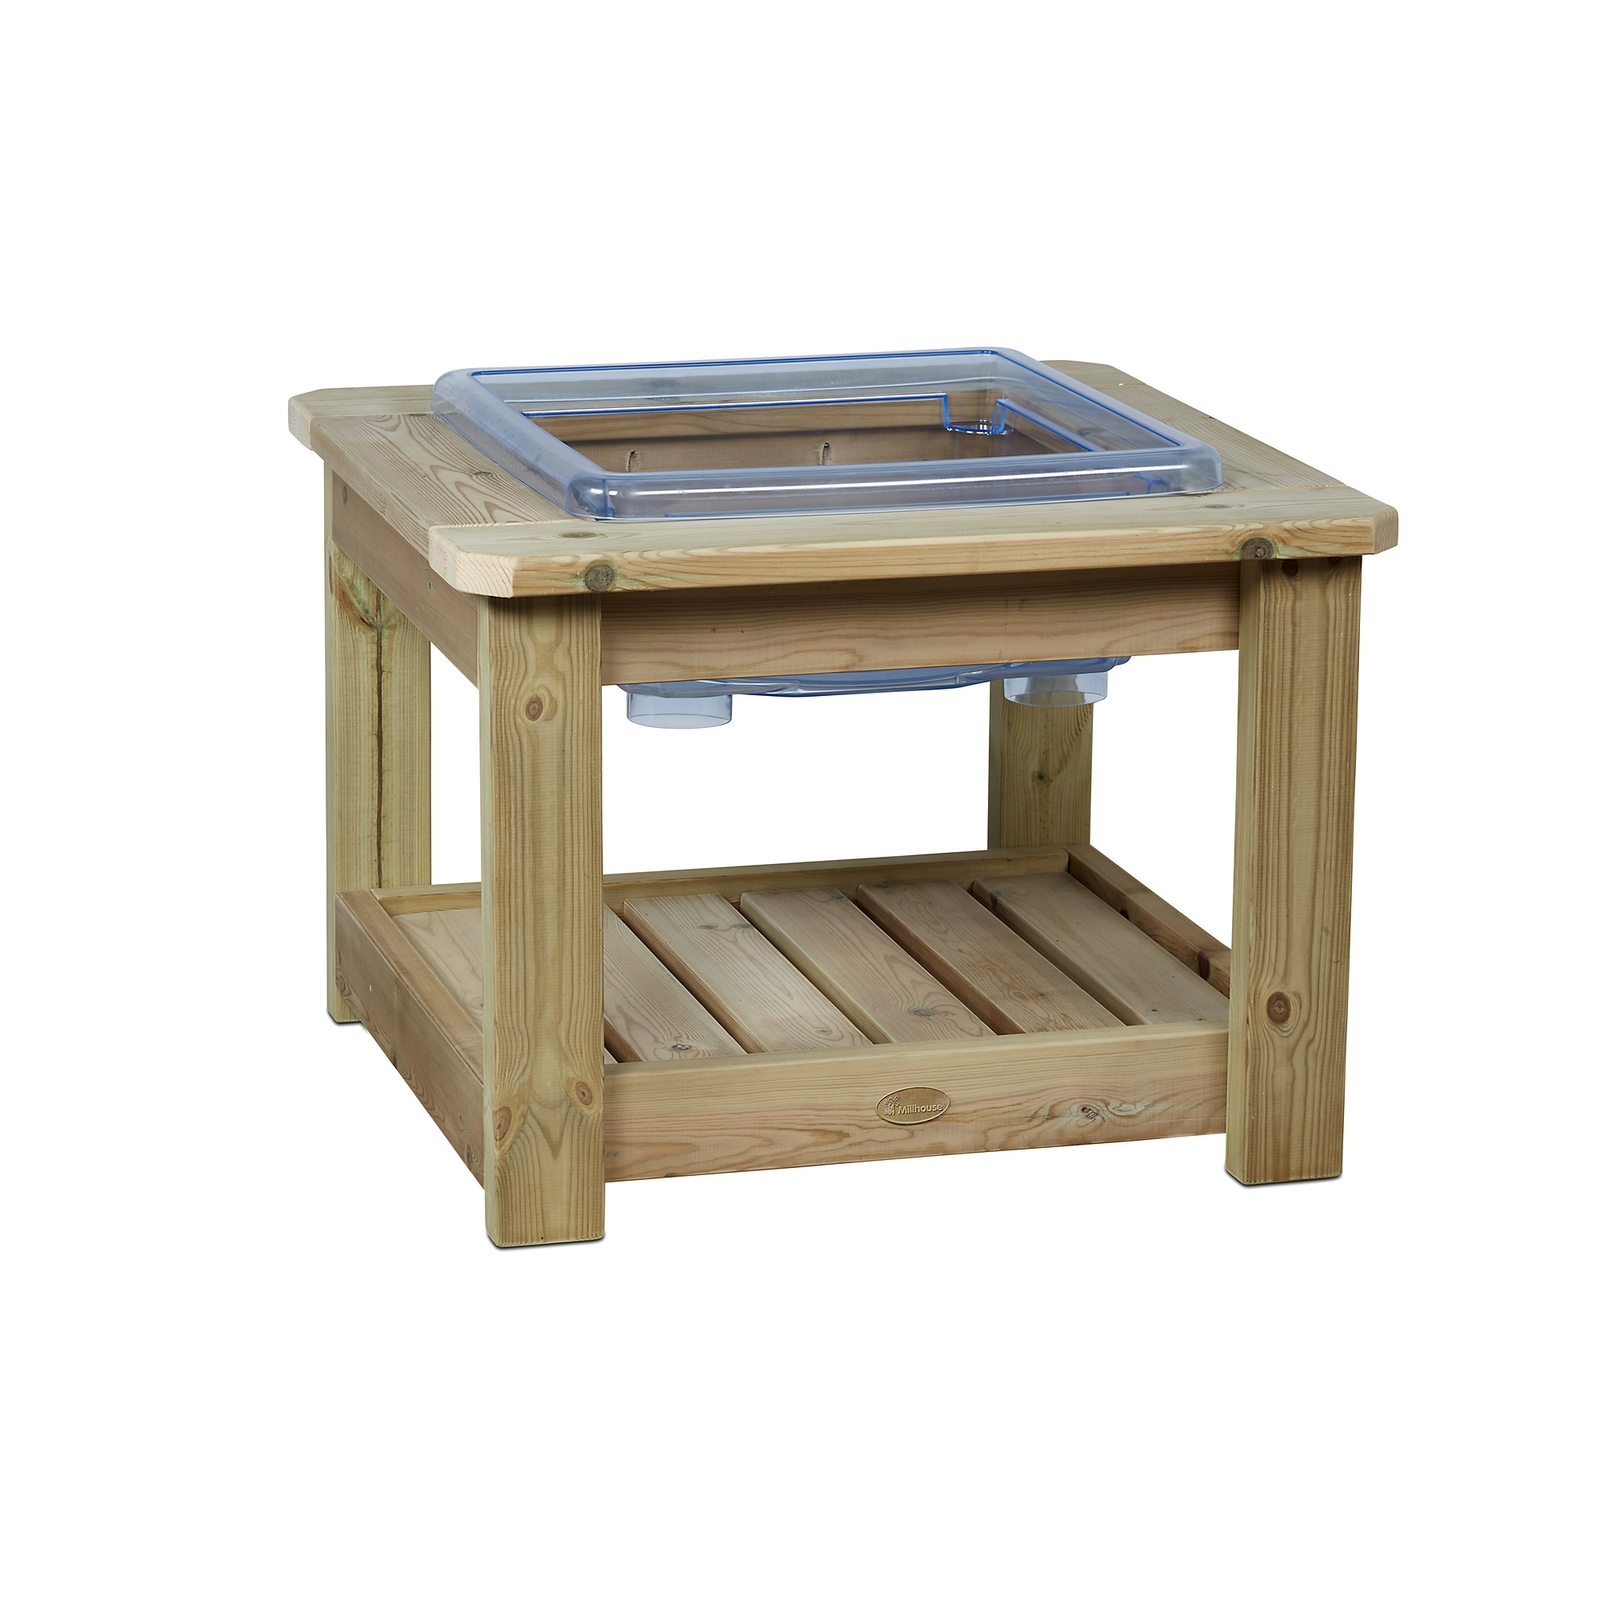 Millhouse Outdoor Sand and Water Station - Preschool